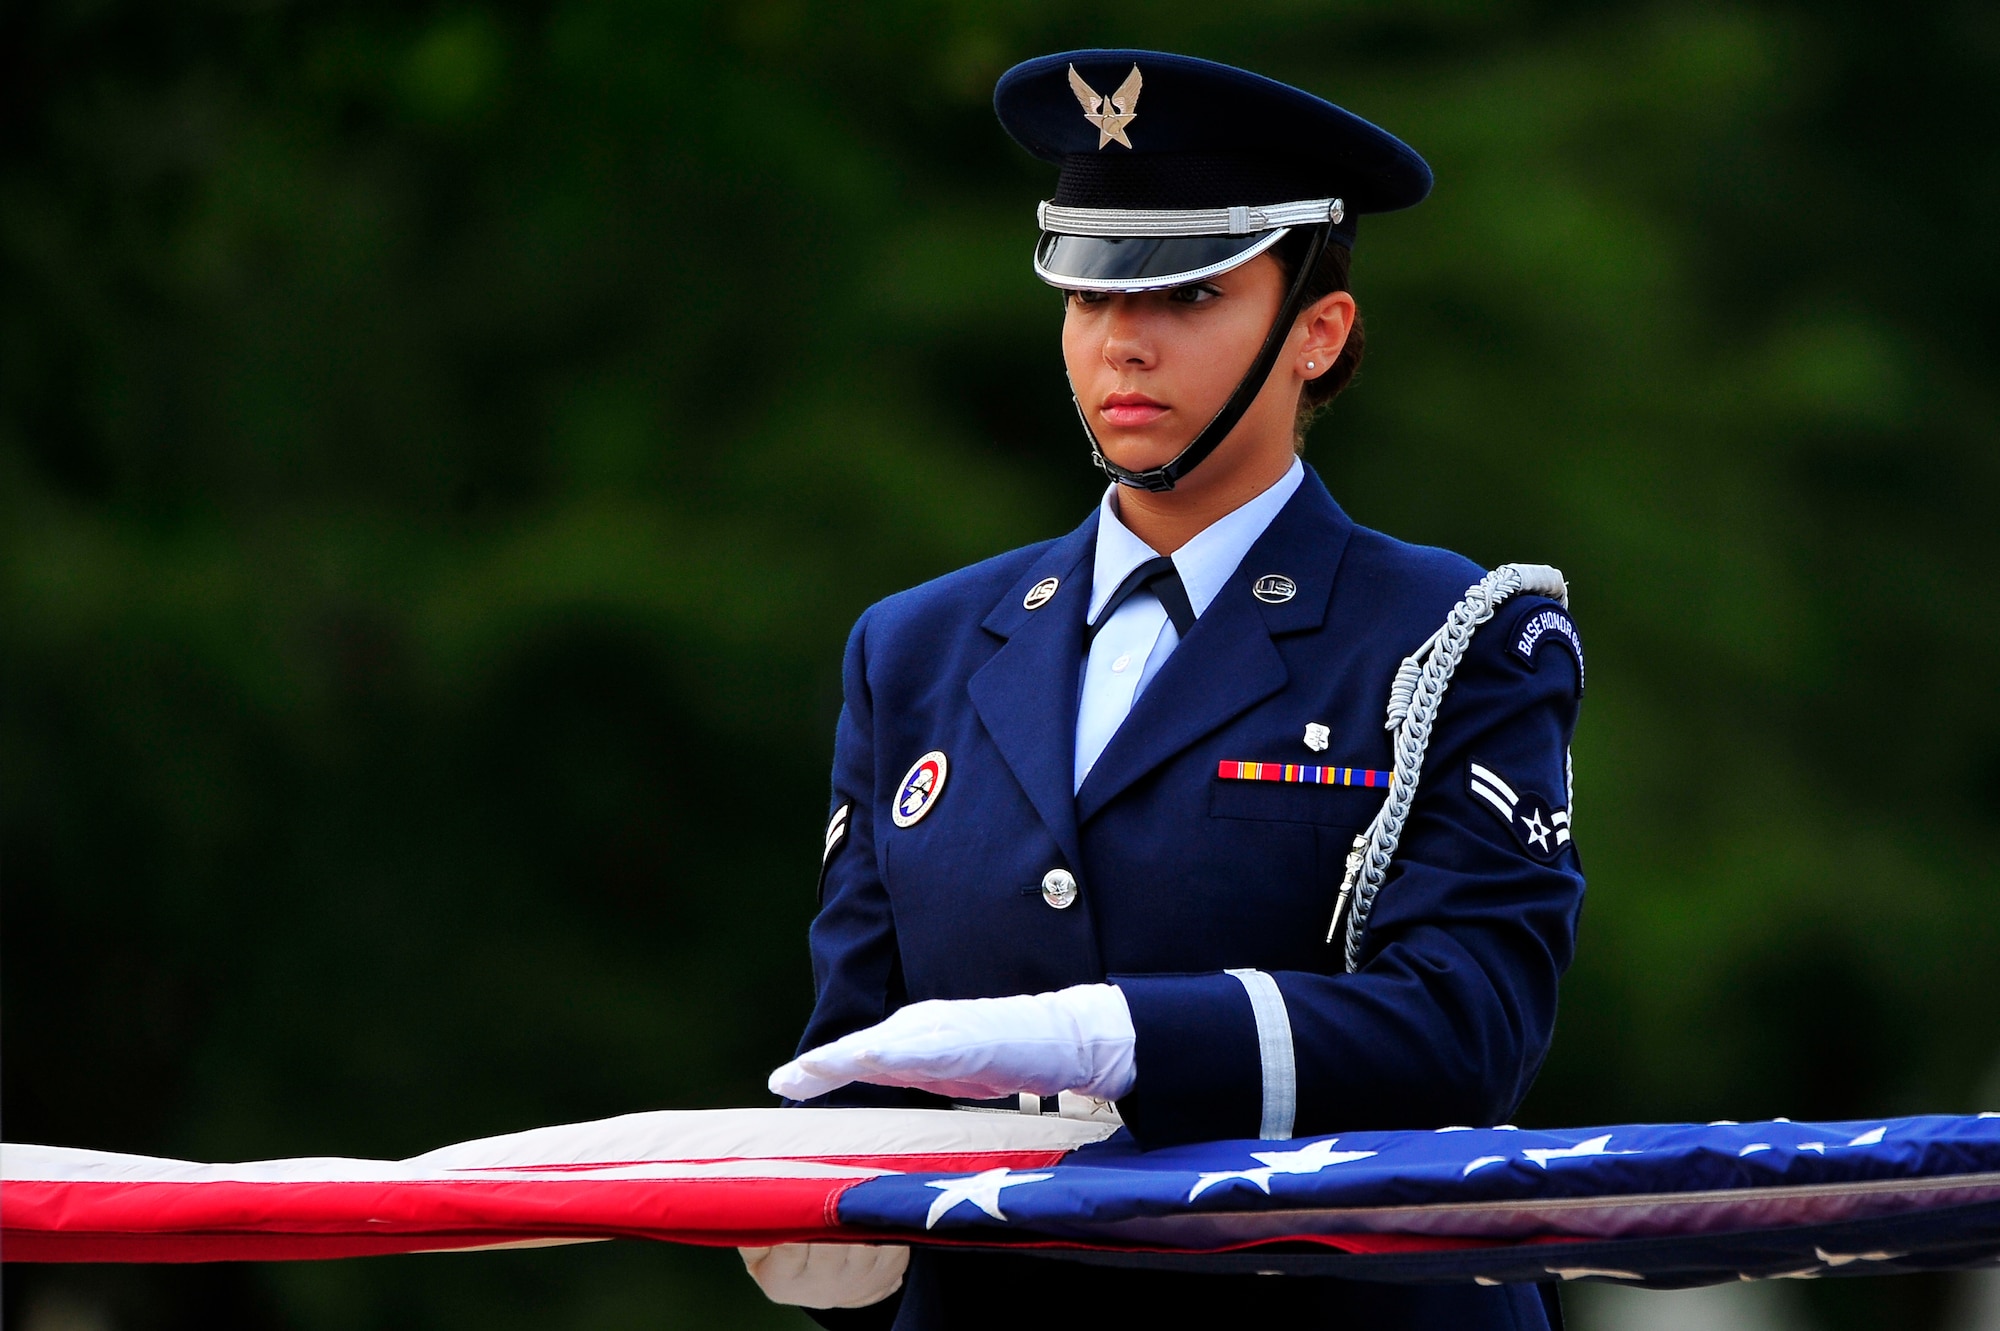 U.S. Air Force Airman 1st Class Jade Derksen, Misawa Honor Guard member, helps fold the U.S. flag during the Patriot Day Retreat Ceremony at Misawa Air Base, Japan, Sept. 11, 2013. The ceremony was held to remember the nearly 3,000 who perished in the 9/11 terrorist attacks 12 years ago. (U.S. Air Force photo by Staff Sgt. Nathan Lipscomb)  